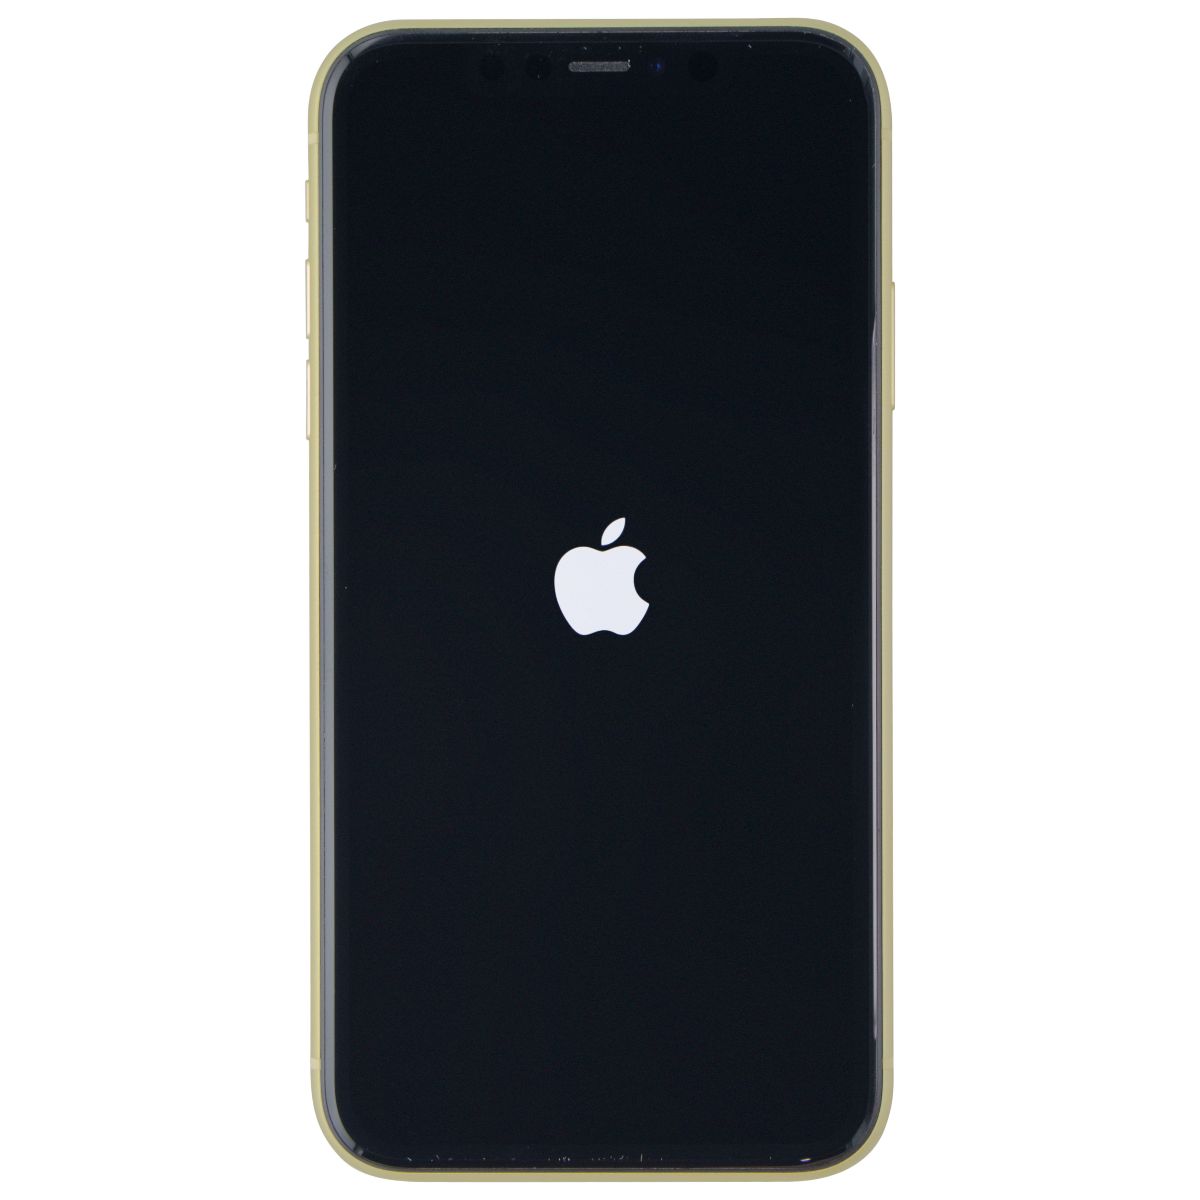 Apple iPhone 11 (6.1-inch) Smartphone (A2111) Spectrum Only - 64GB / Yellow Cell Phones & Smartphones Apple    - Simple Cell Bulk Wholesale Pricing - USA Seller